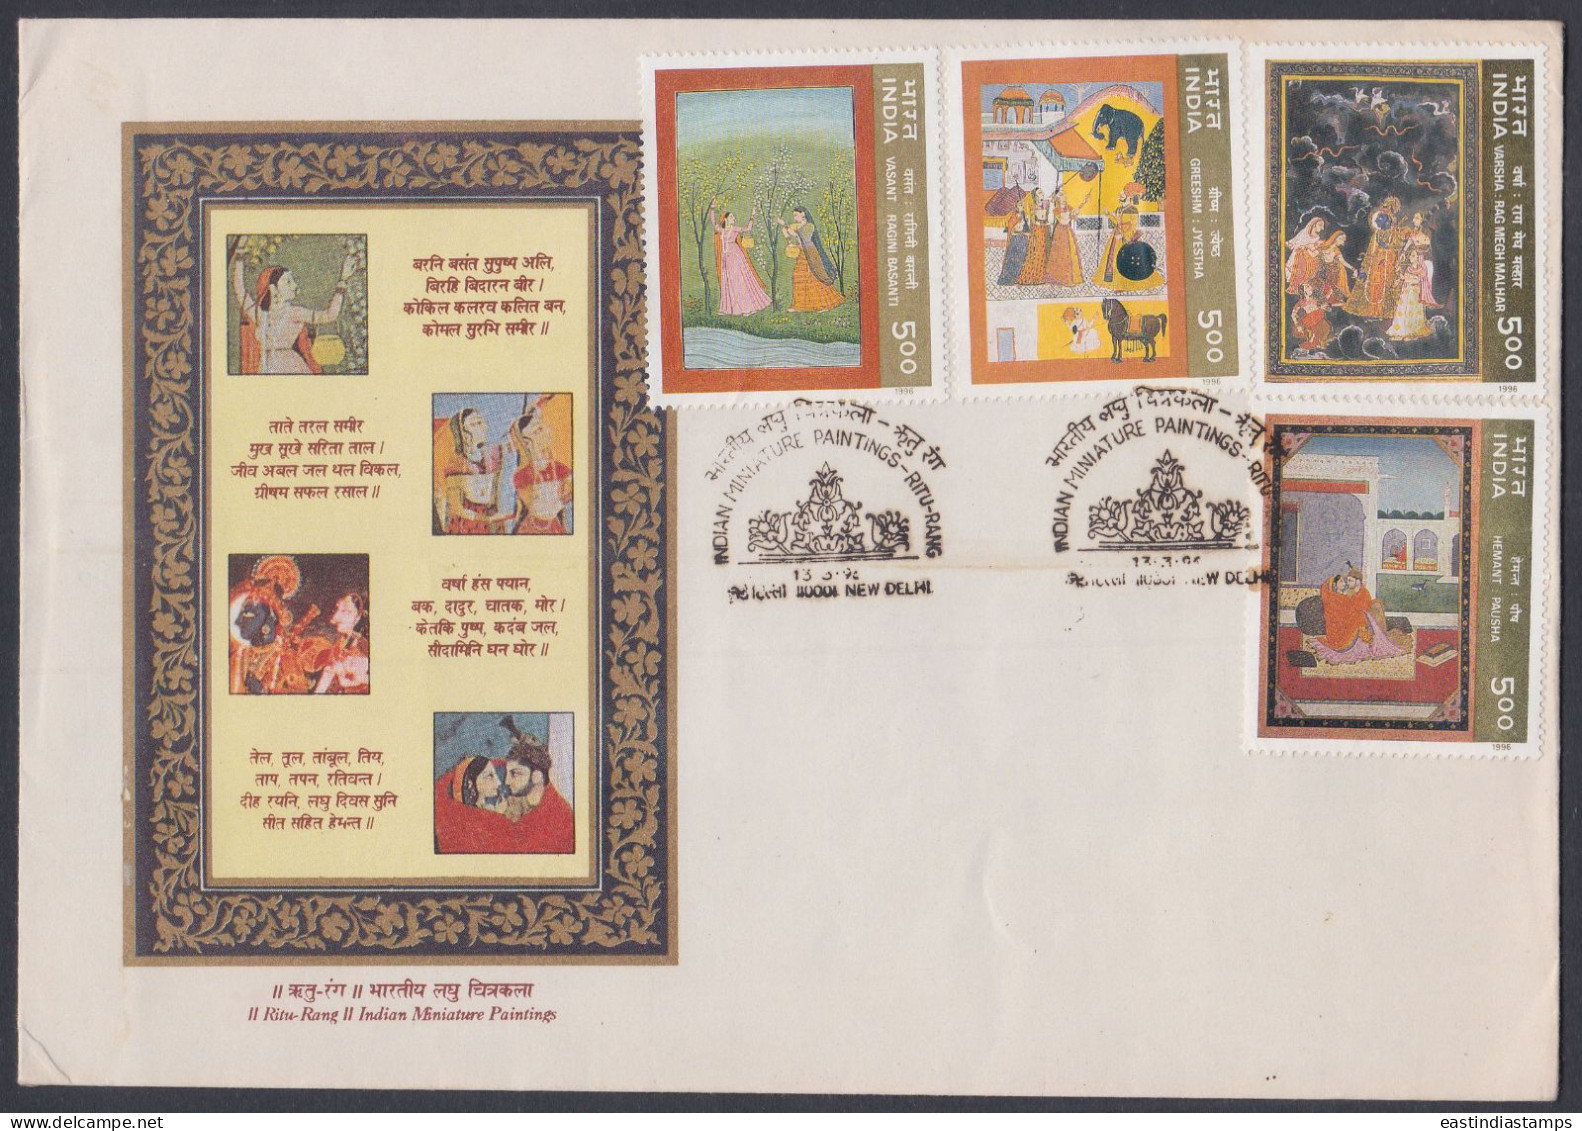 Inde India 1996 FDC Indian Miniature Paintings, Painting, Art, Arts, Painter, Horse, Royalty, Elephant, First Day Cover - Briefe U. Dokumente